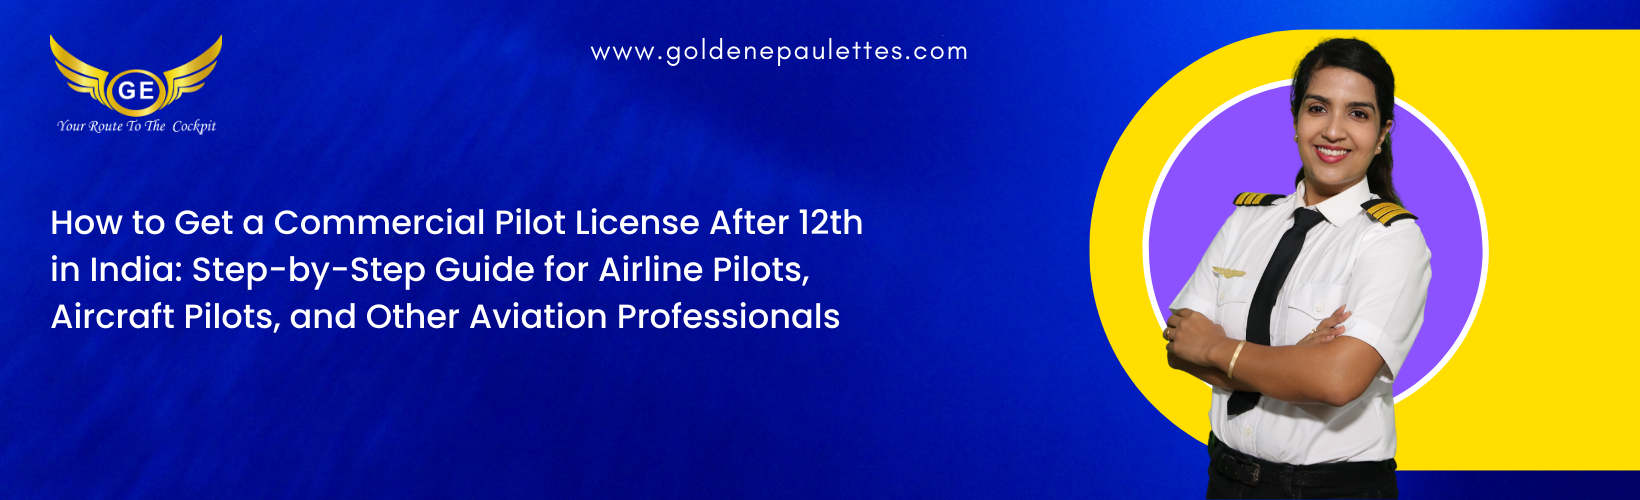 How to Get a Commercial Pilot License After 12th in India